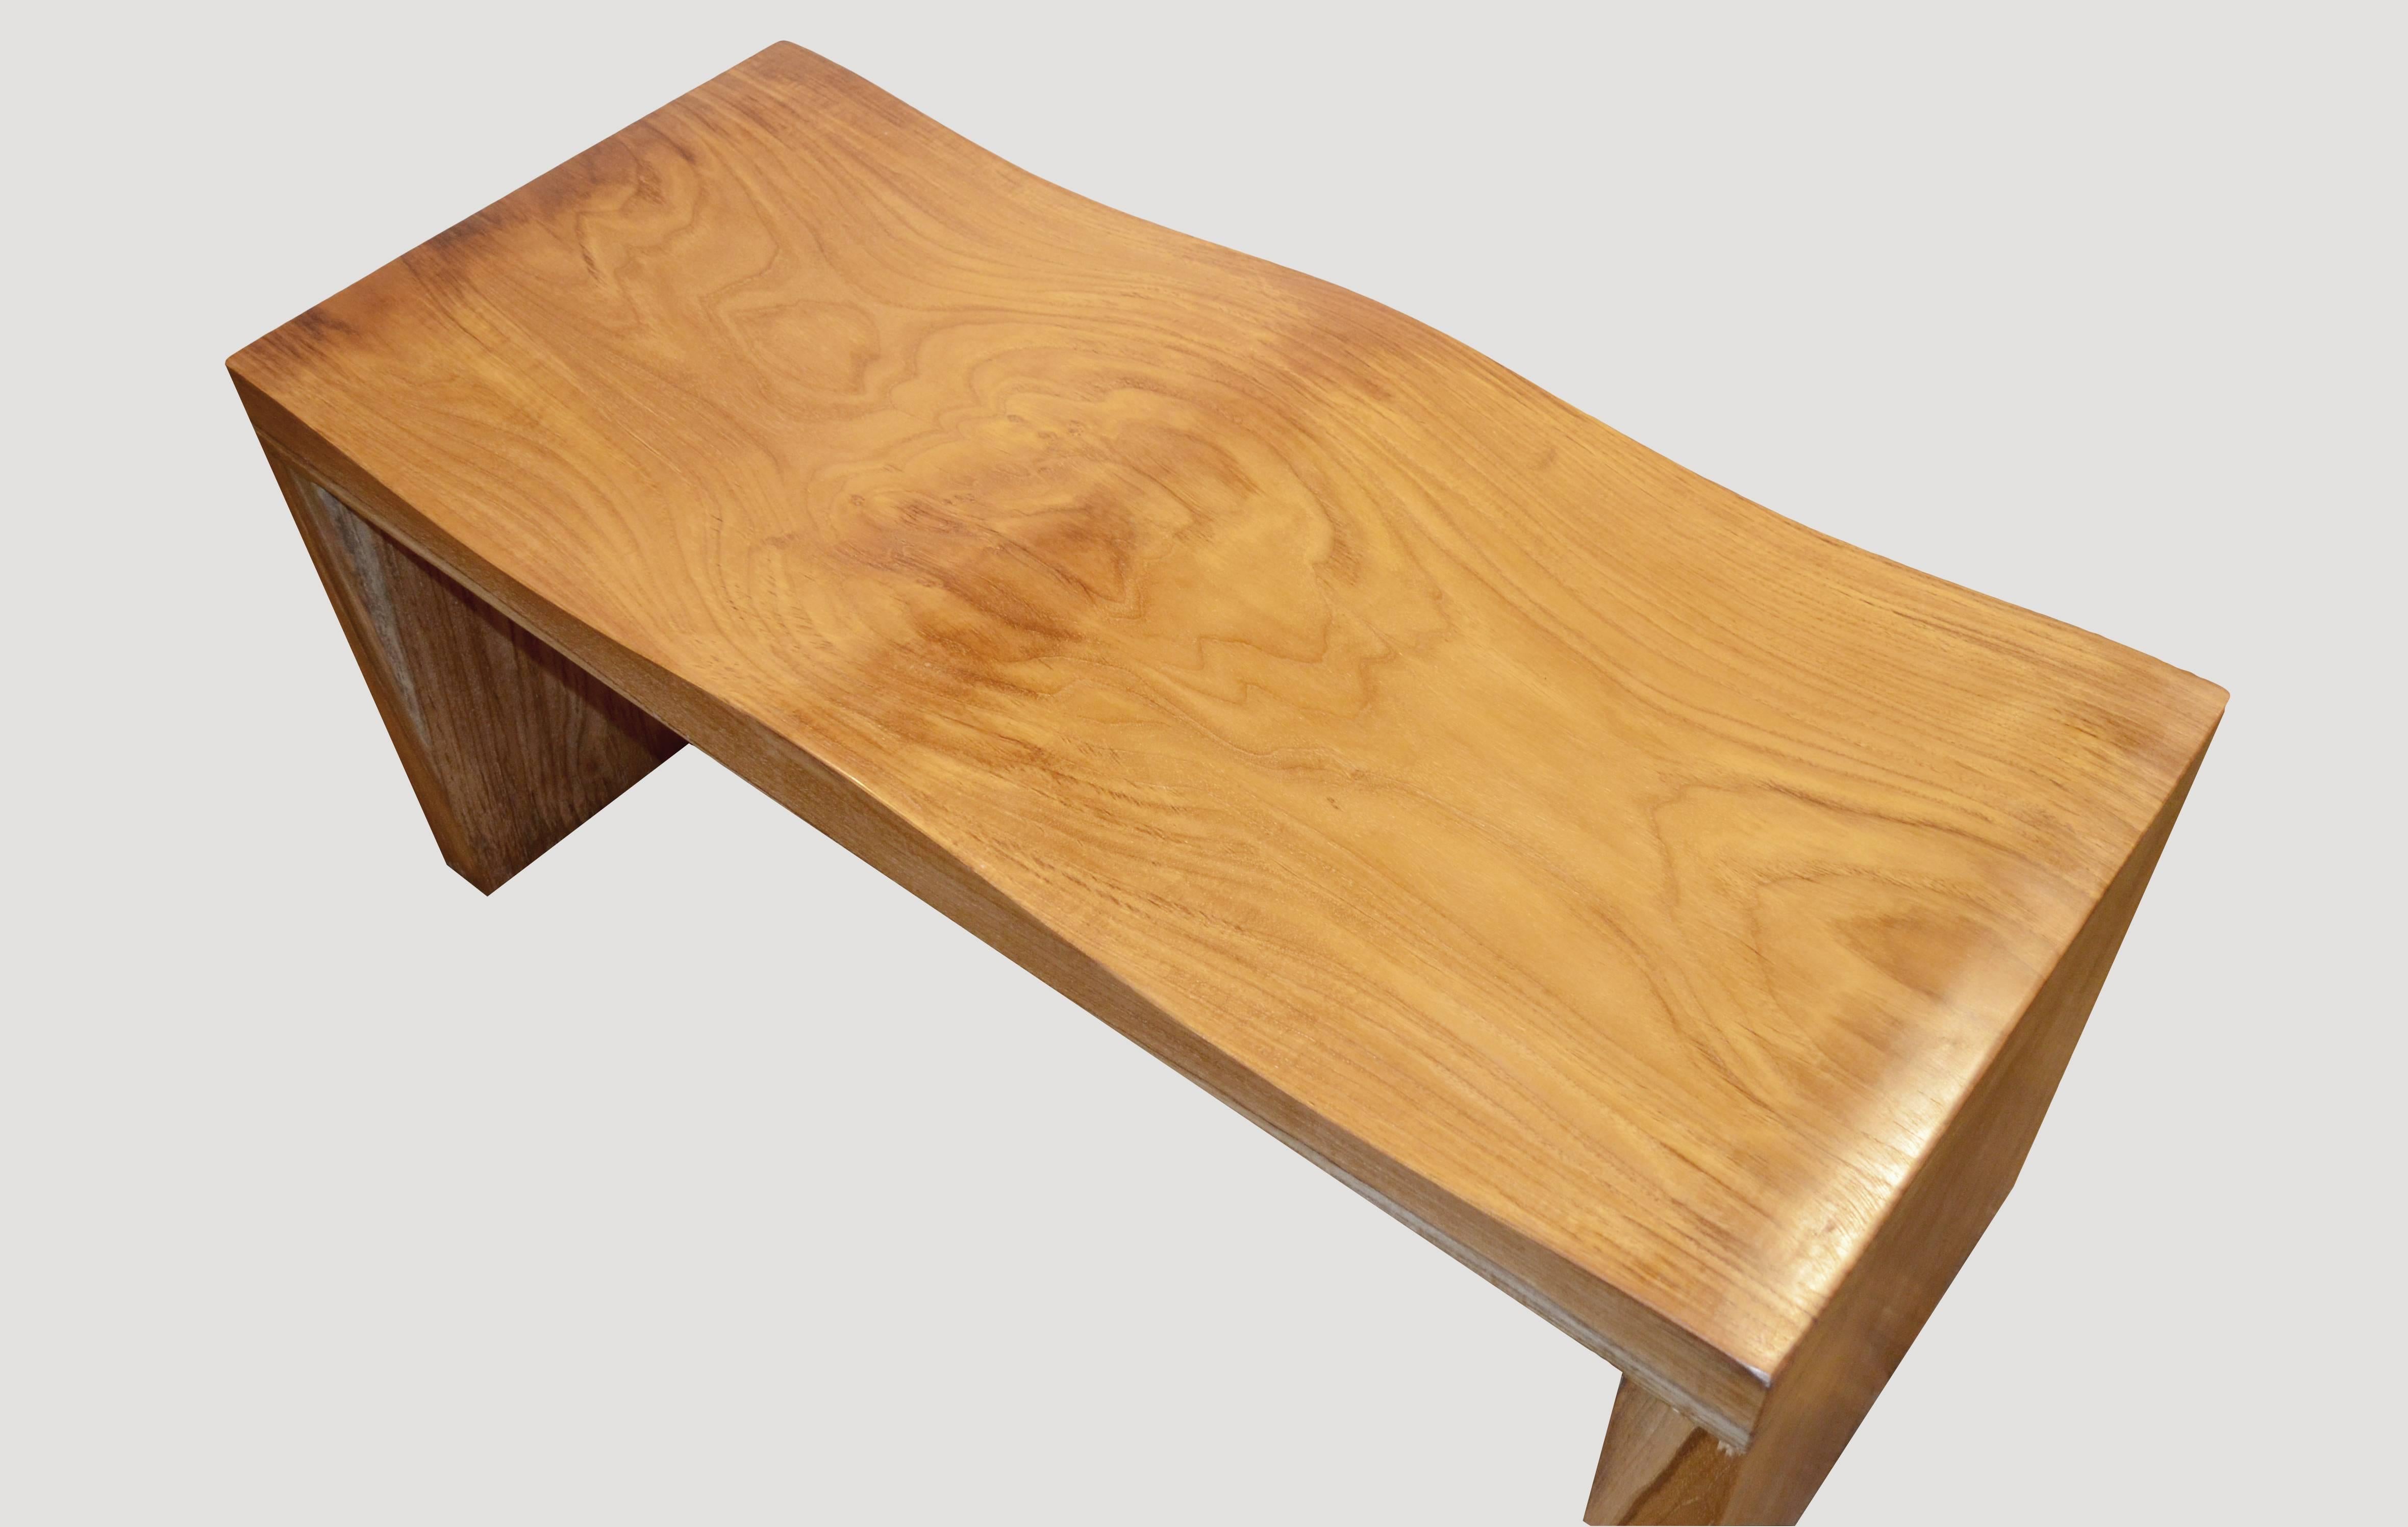 The top and legs of this particular wave bench is made from an impressive single 18″ wide x 2.5″ thick teak wood slab. Also available 12″ wide.

The teak wave bench represents a sleek, modern aesthetic, designed to provide comfort and durability.